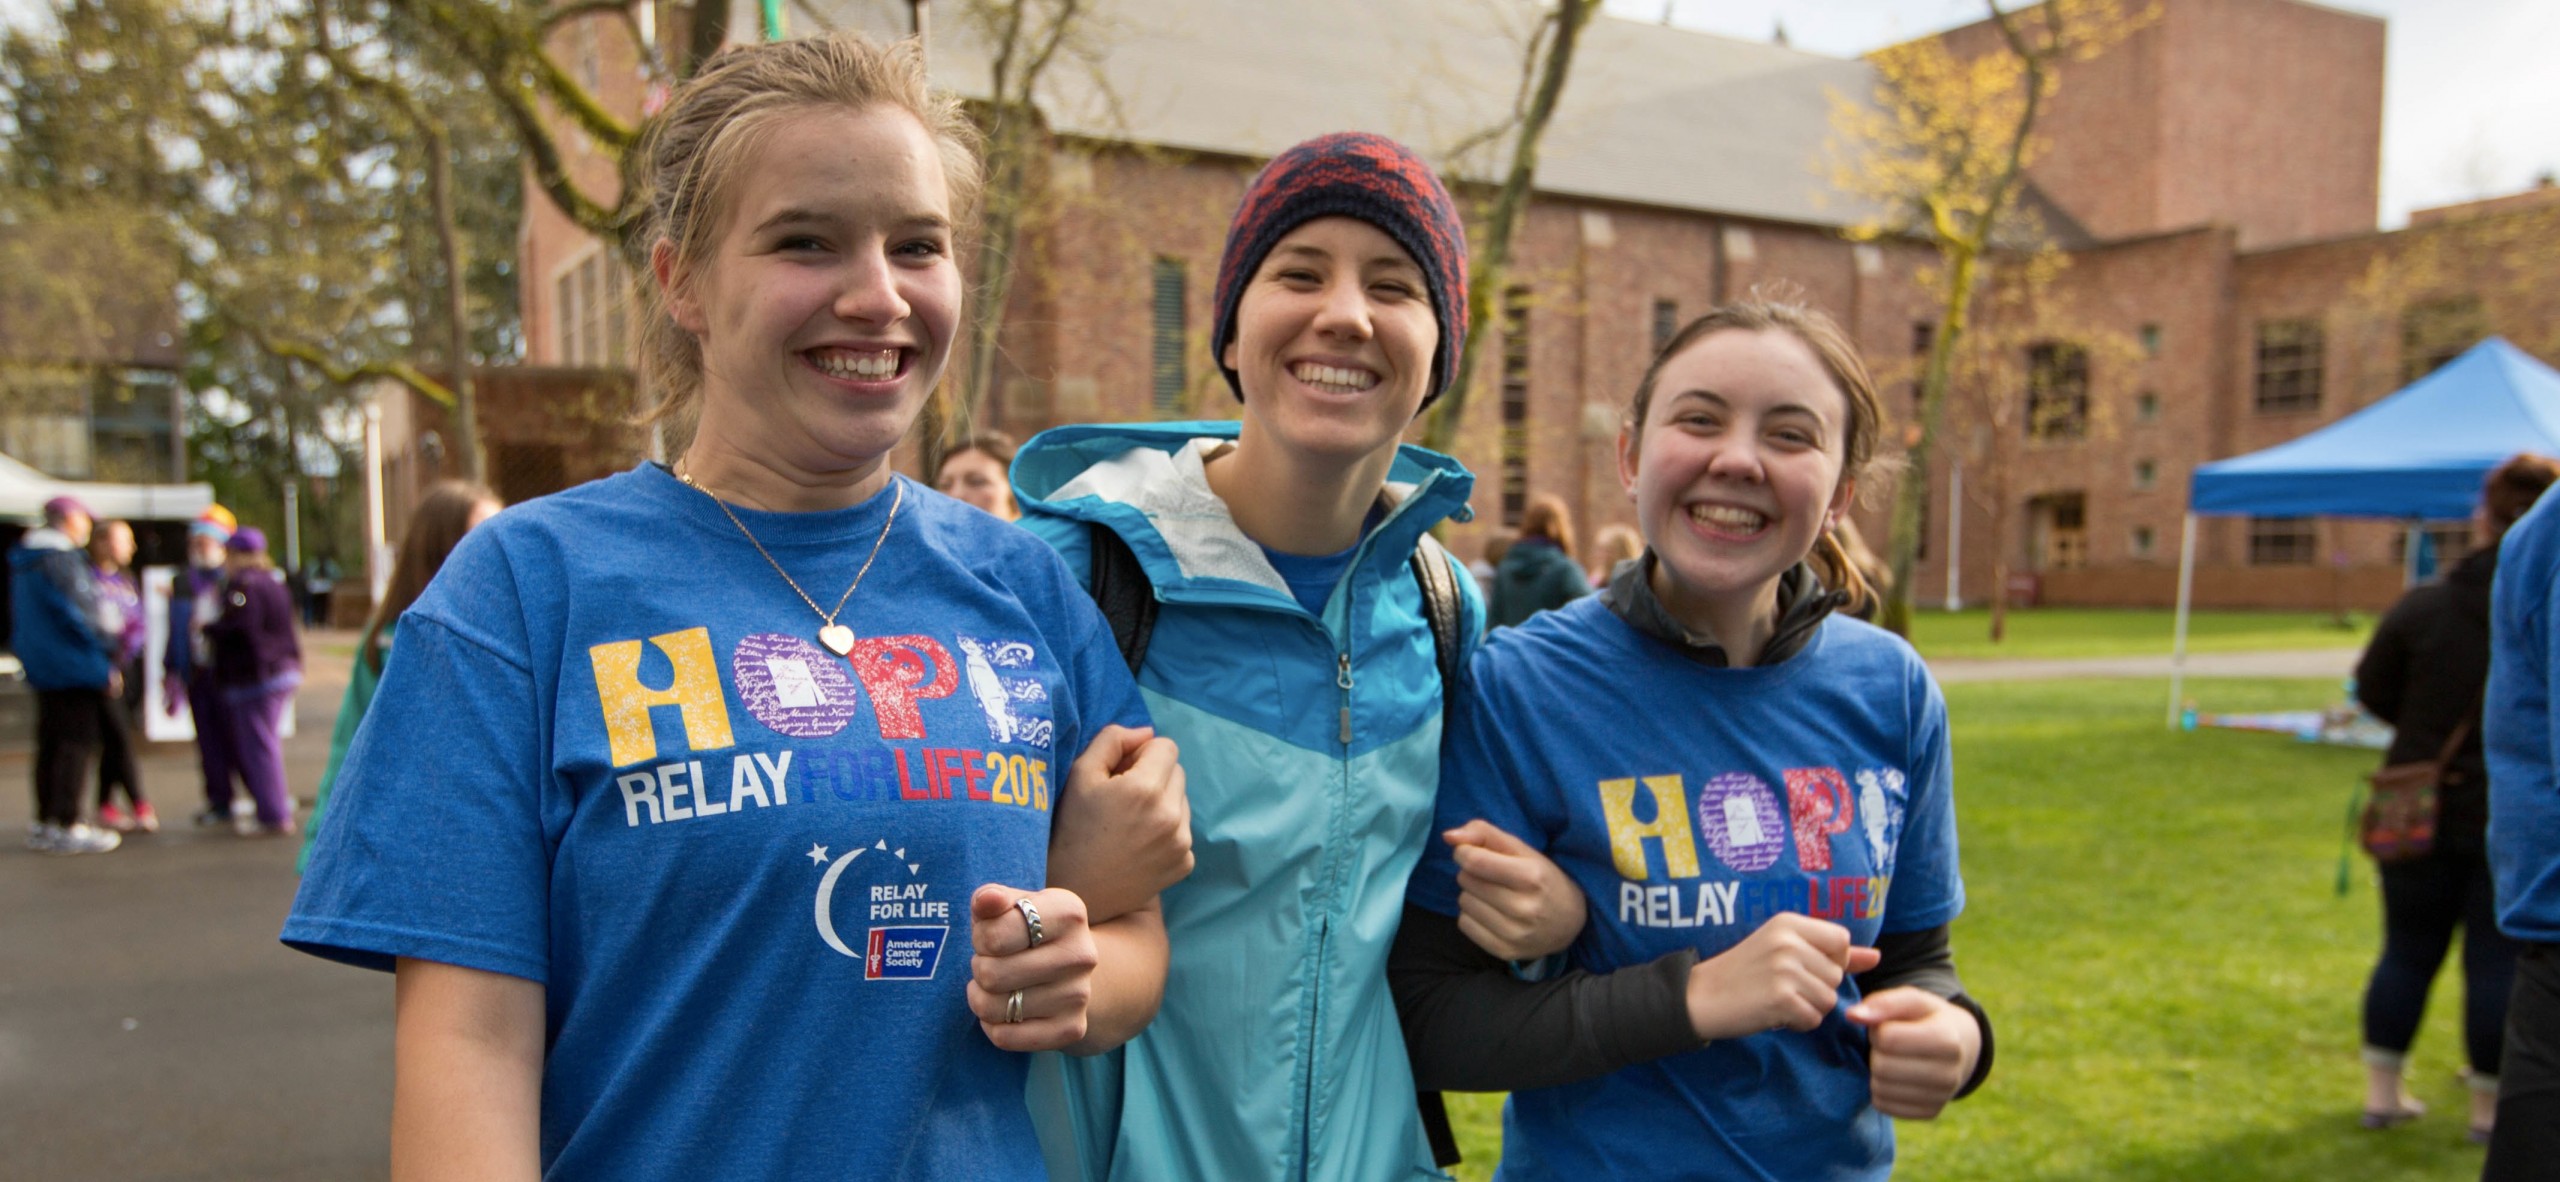 PLU Relay for Life on Friday, April 24, 2015. (Photo: John Froschauer/PLU) Students walking and smiling.